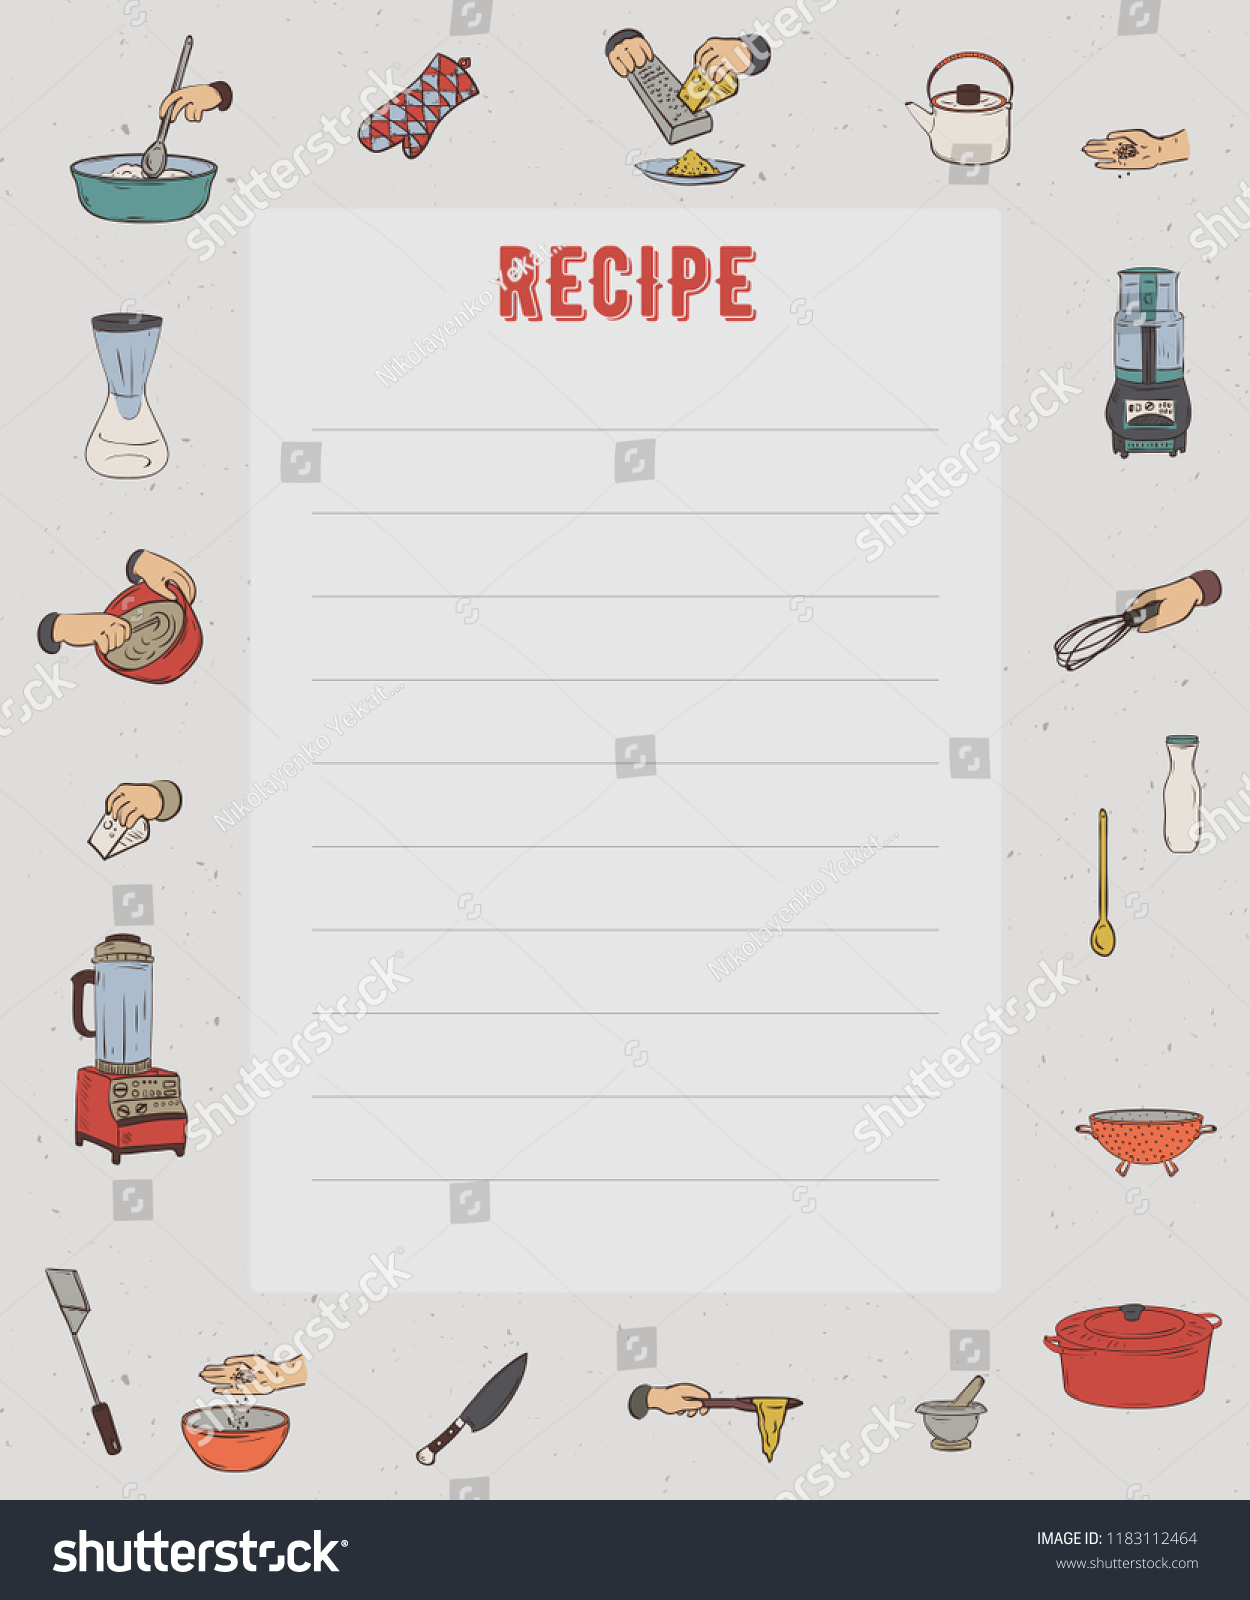 Recipe Card Cookbook Page Design Template Stock Vector (Royalty Pertaining To Recipe Card Design Template